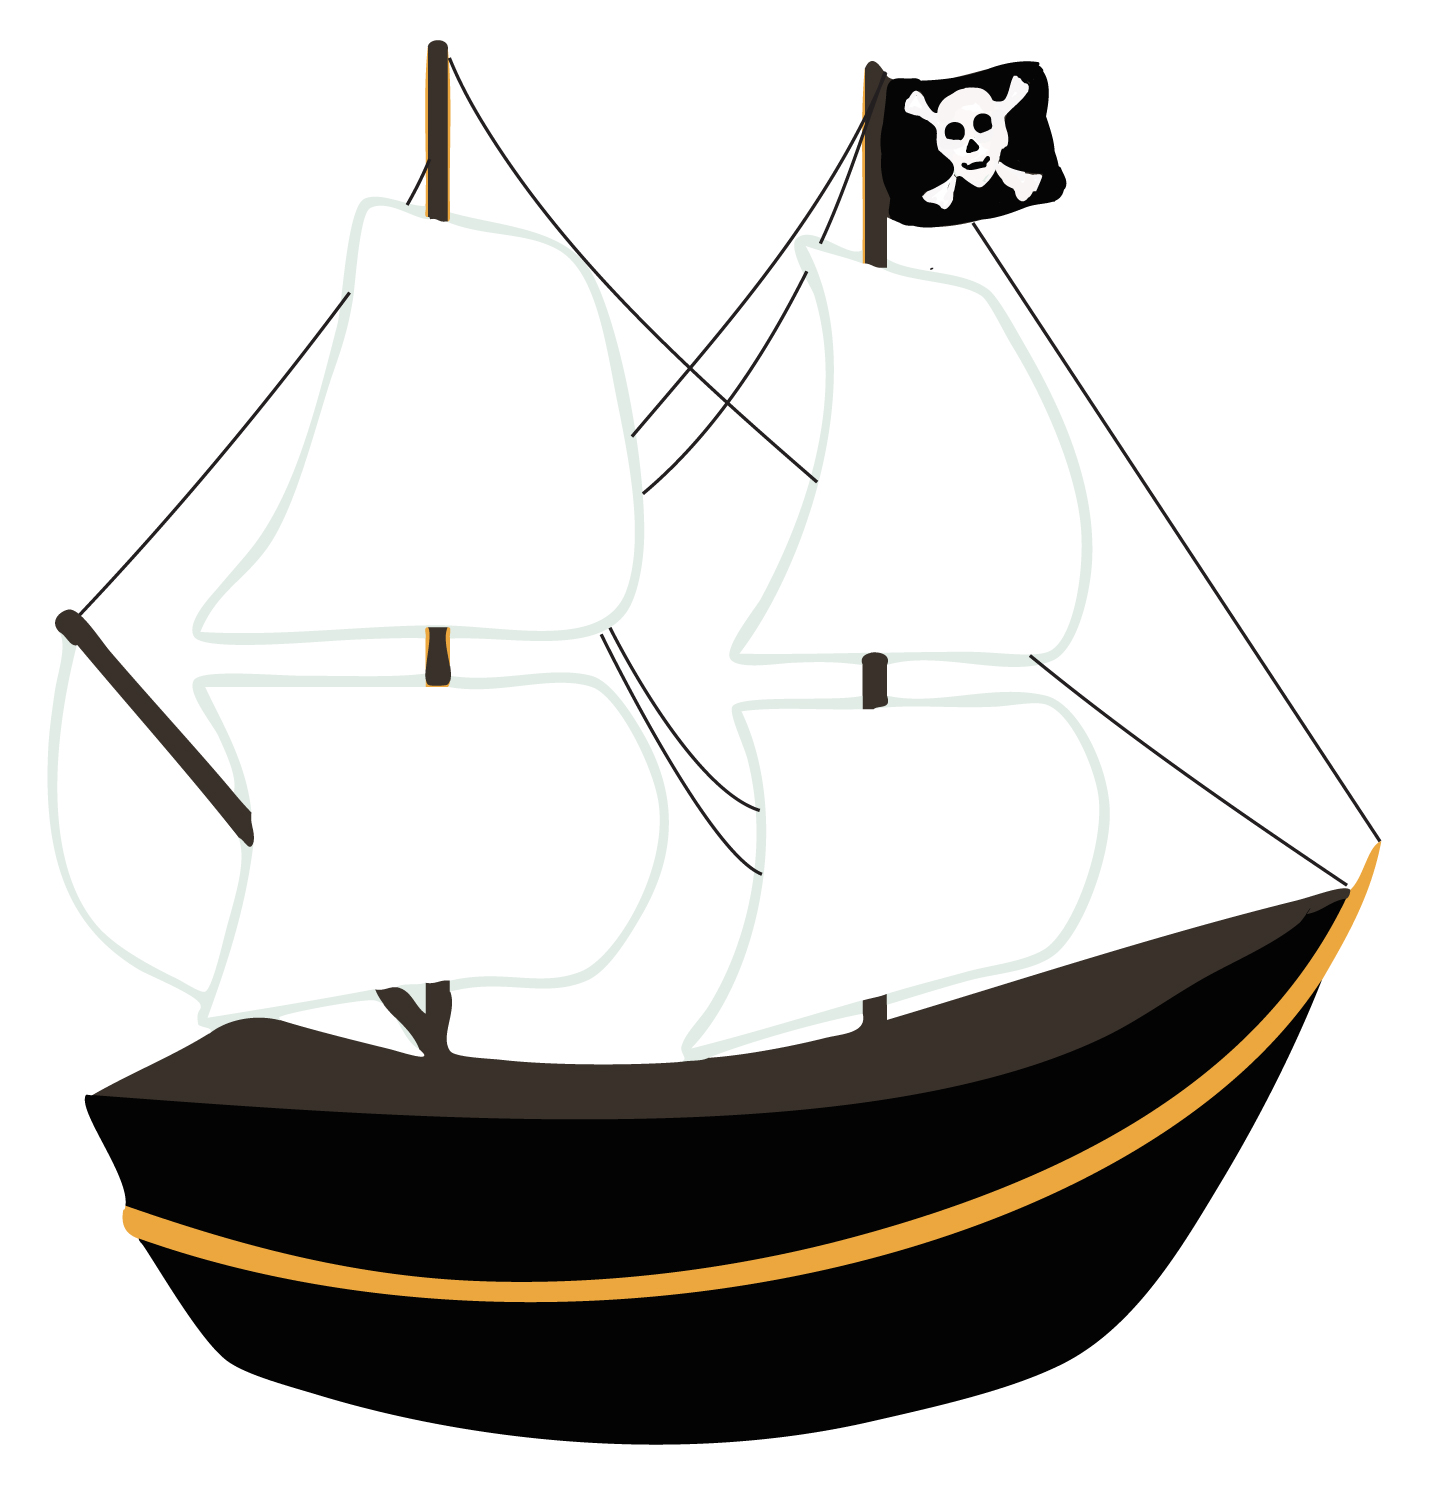 Early Learning Resources Pirate ship - Free Early Years and Primary